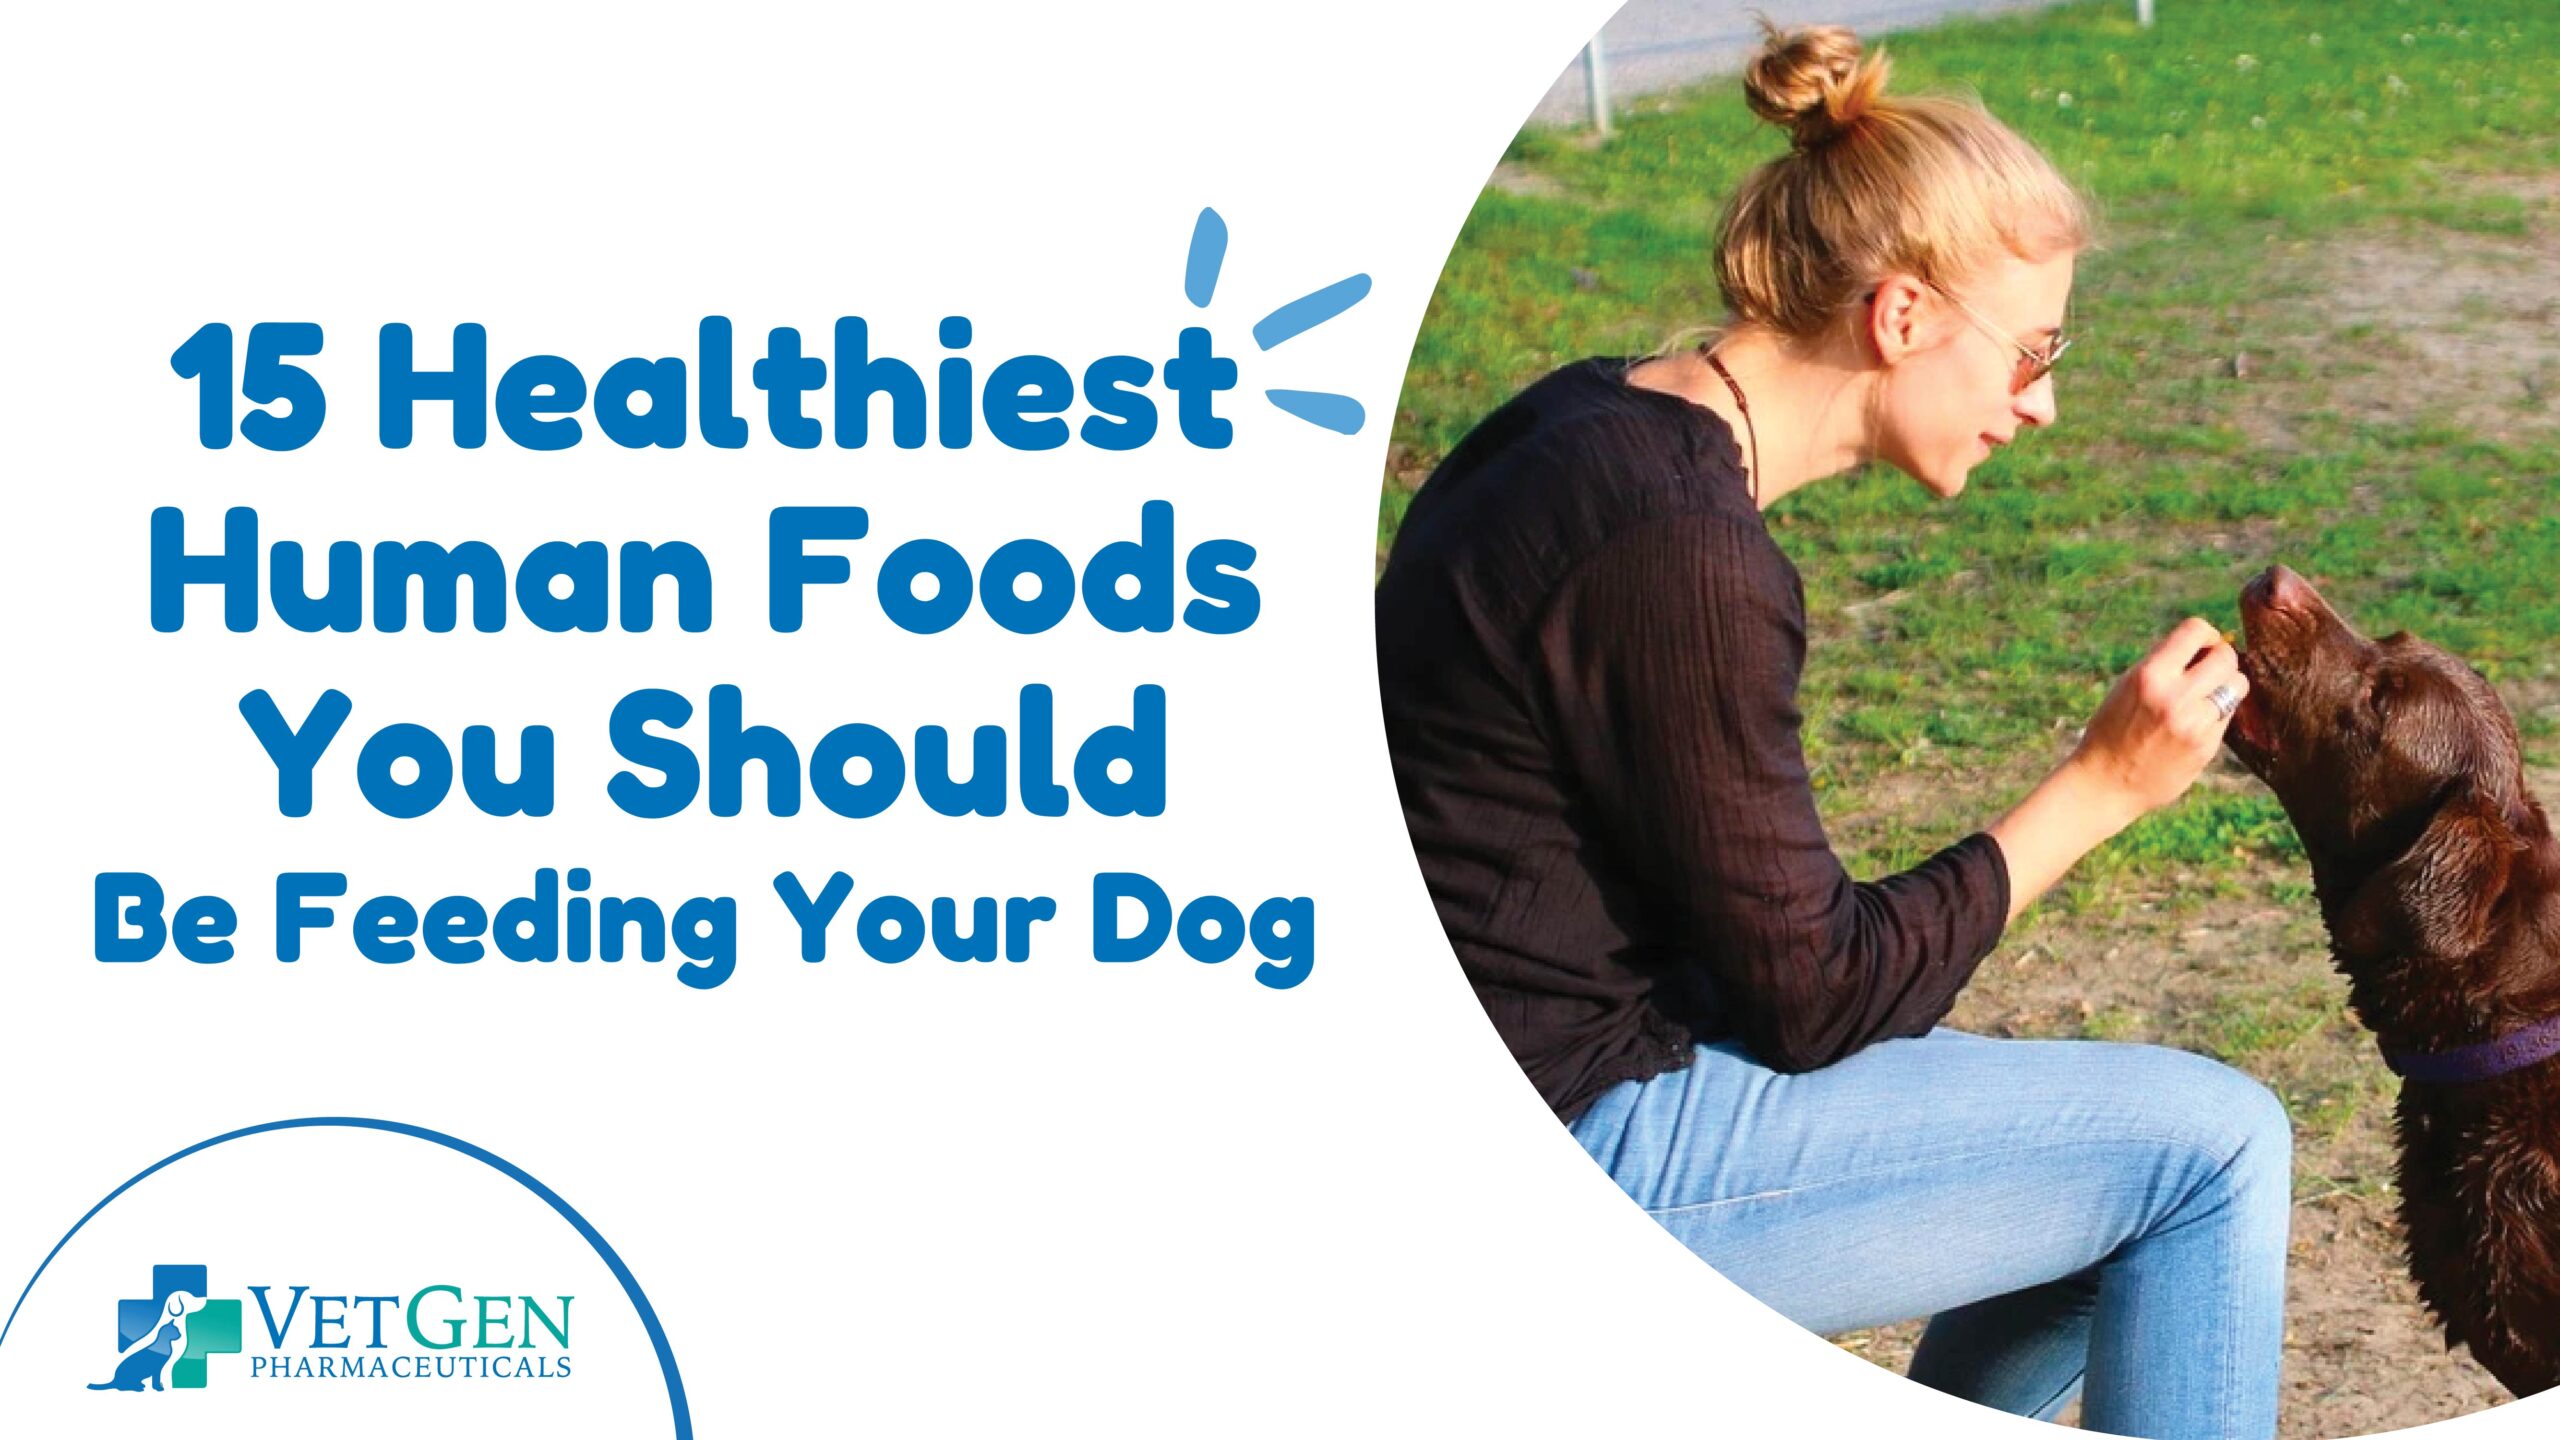 15 Healthiest Human Foods You Should Be Feeding Your Dog